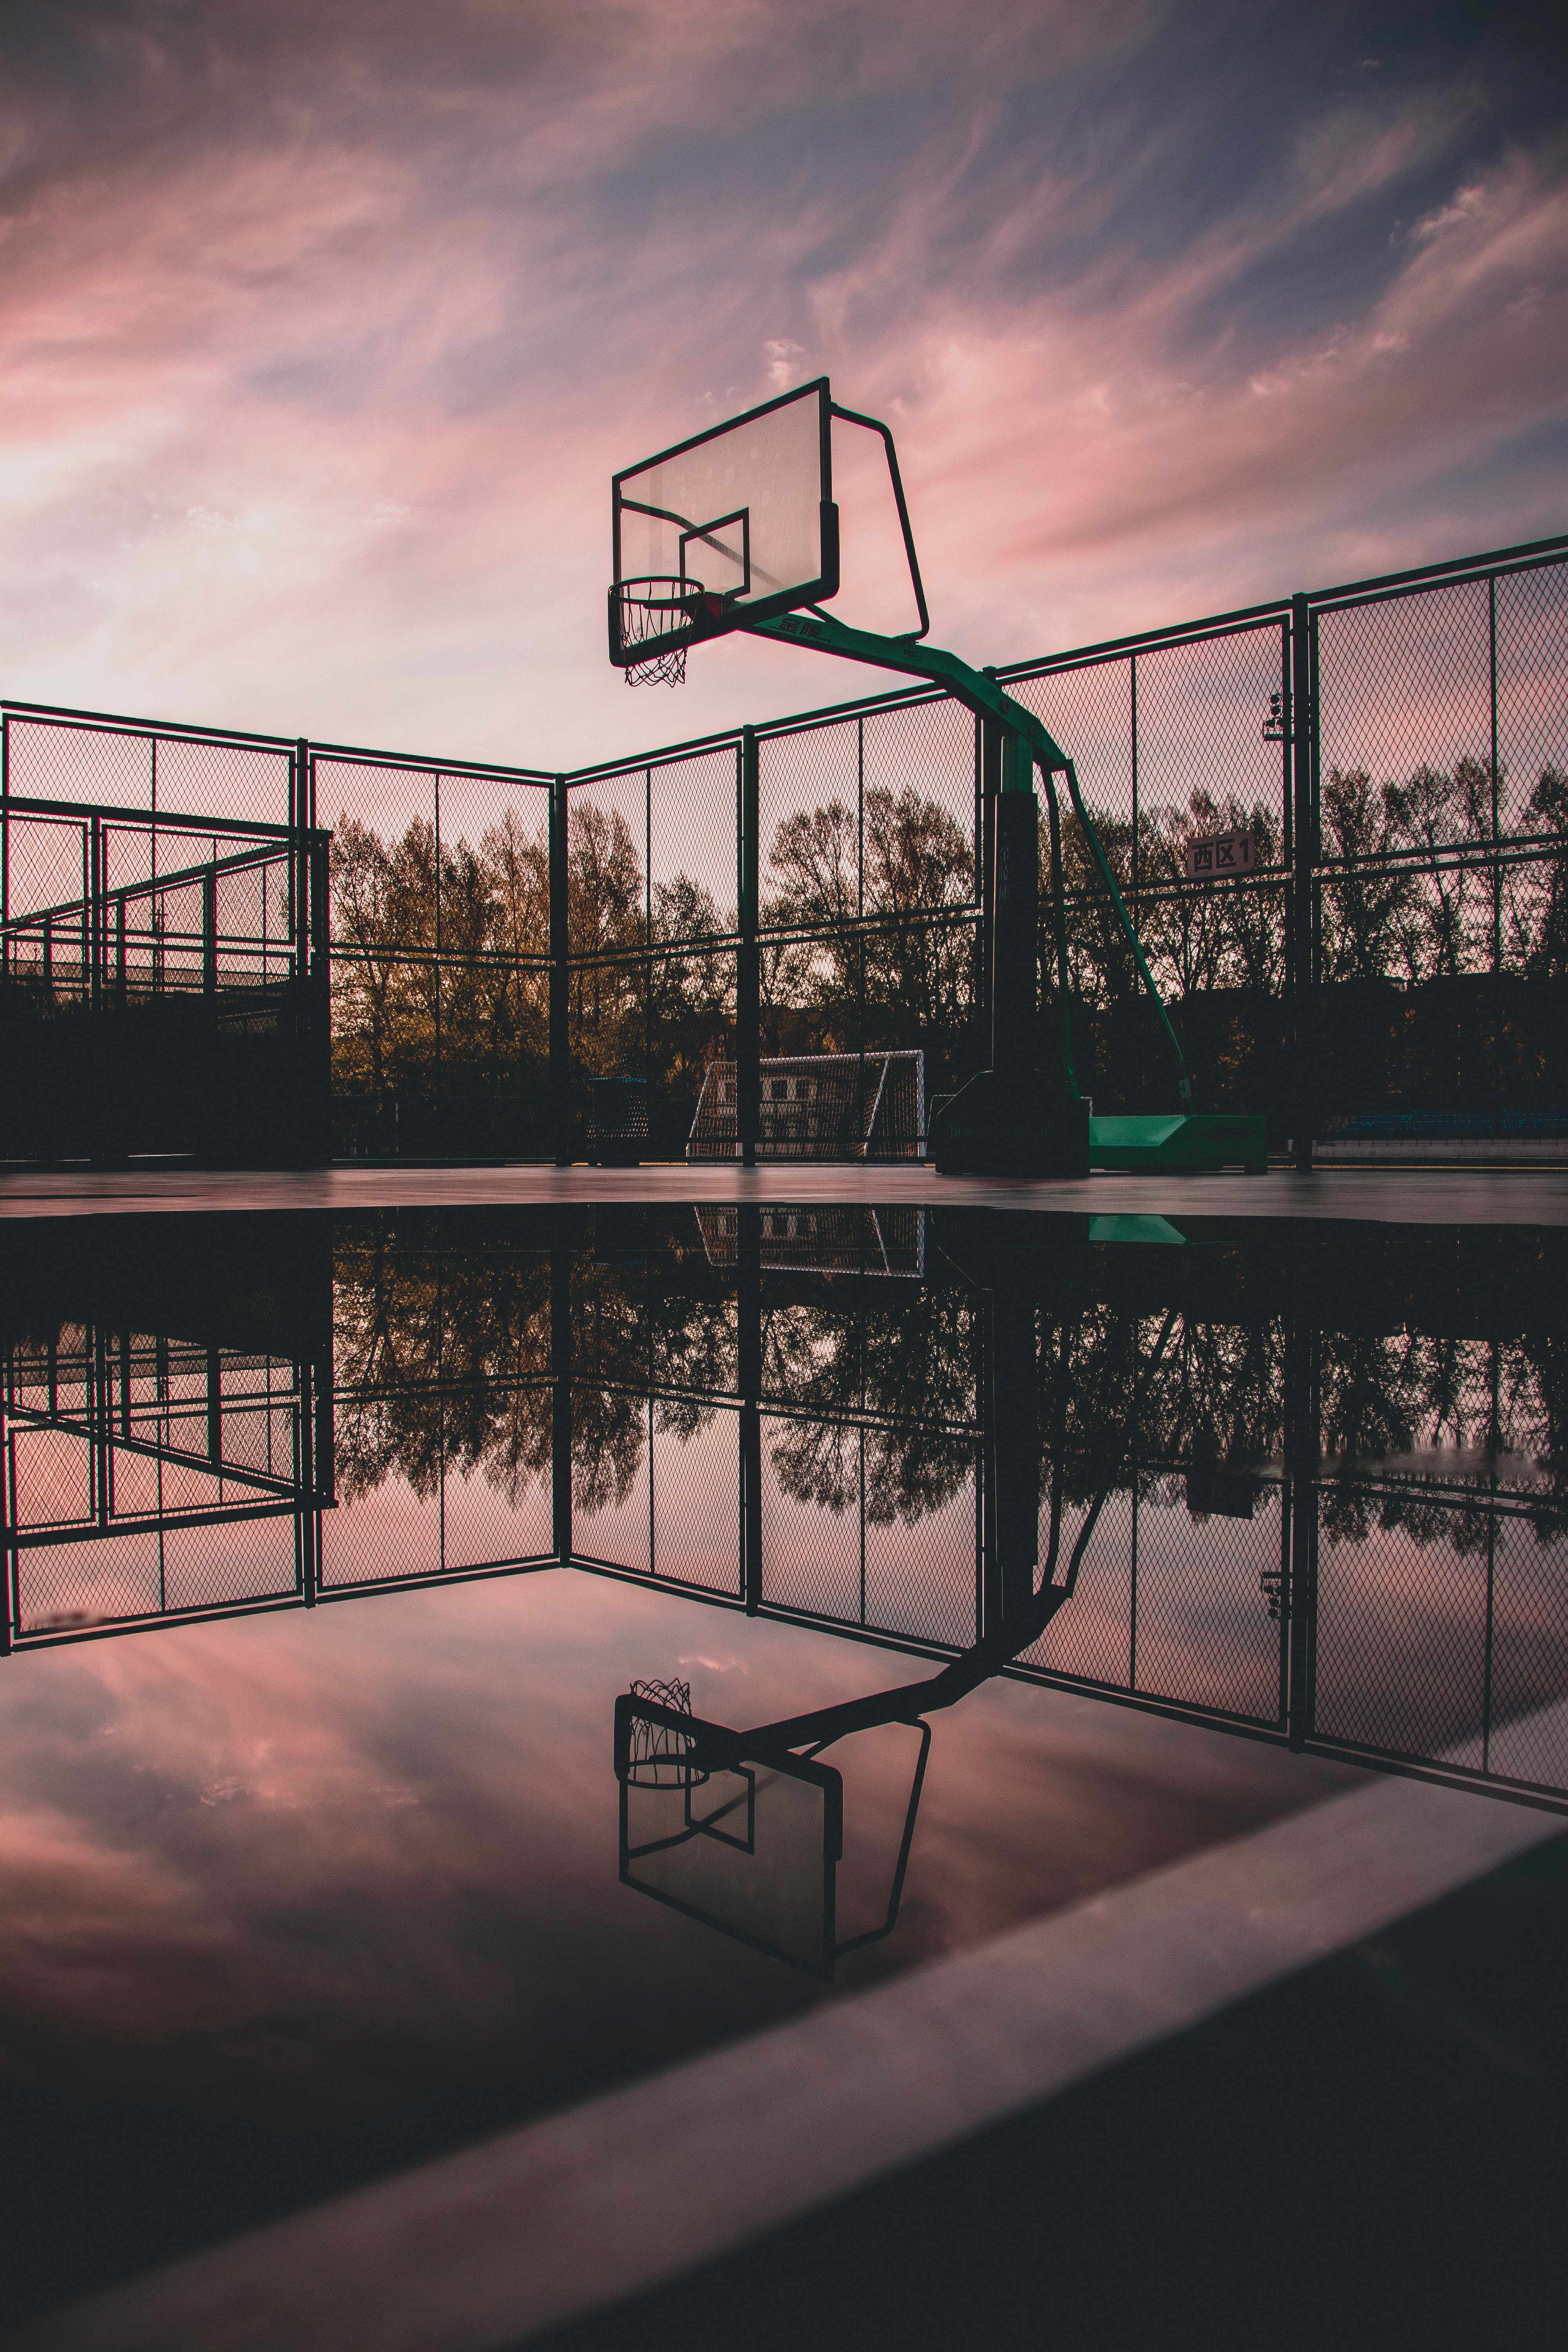 Best Free Basketball Court & Image · 100% Royalty Free HD Downloads